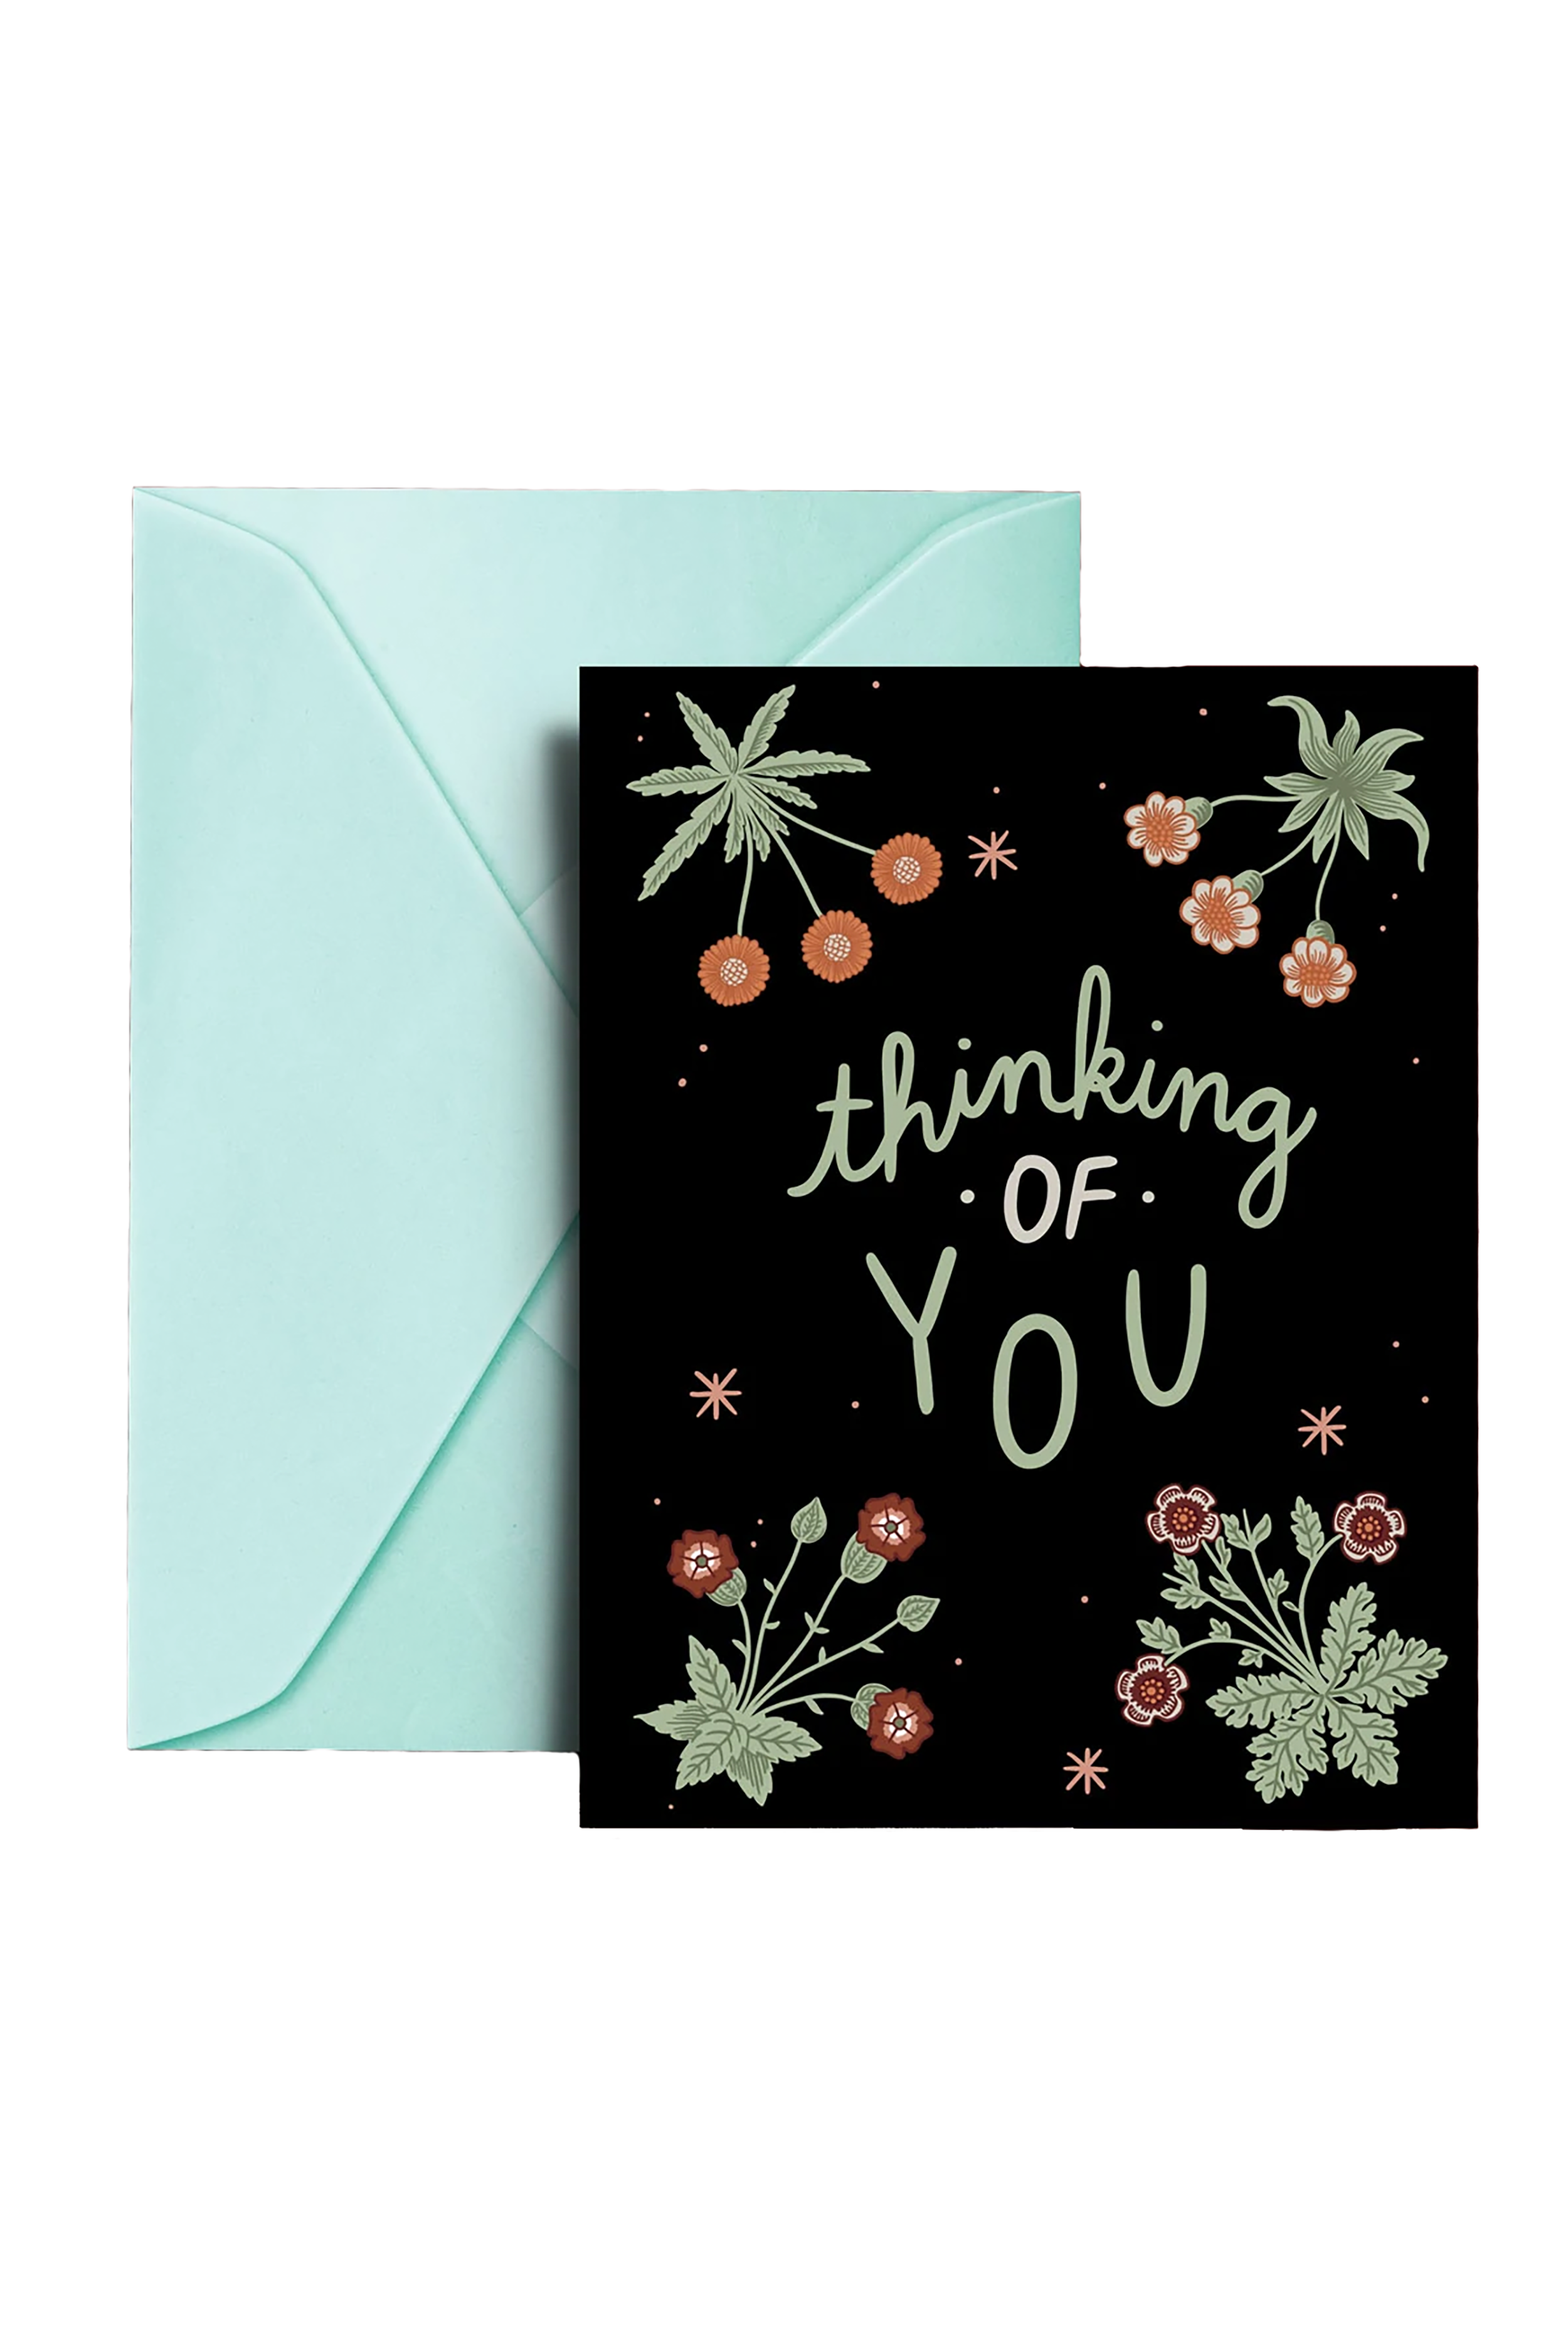 Thinking of You (Morris Flowers) Card